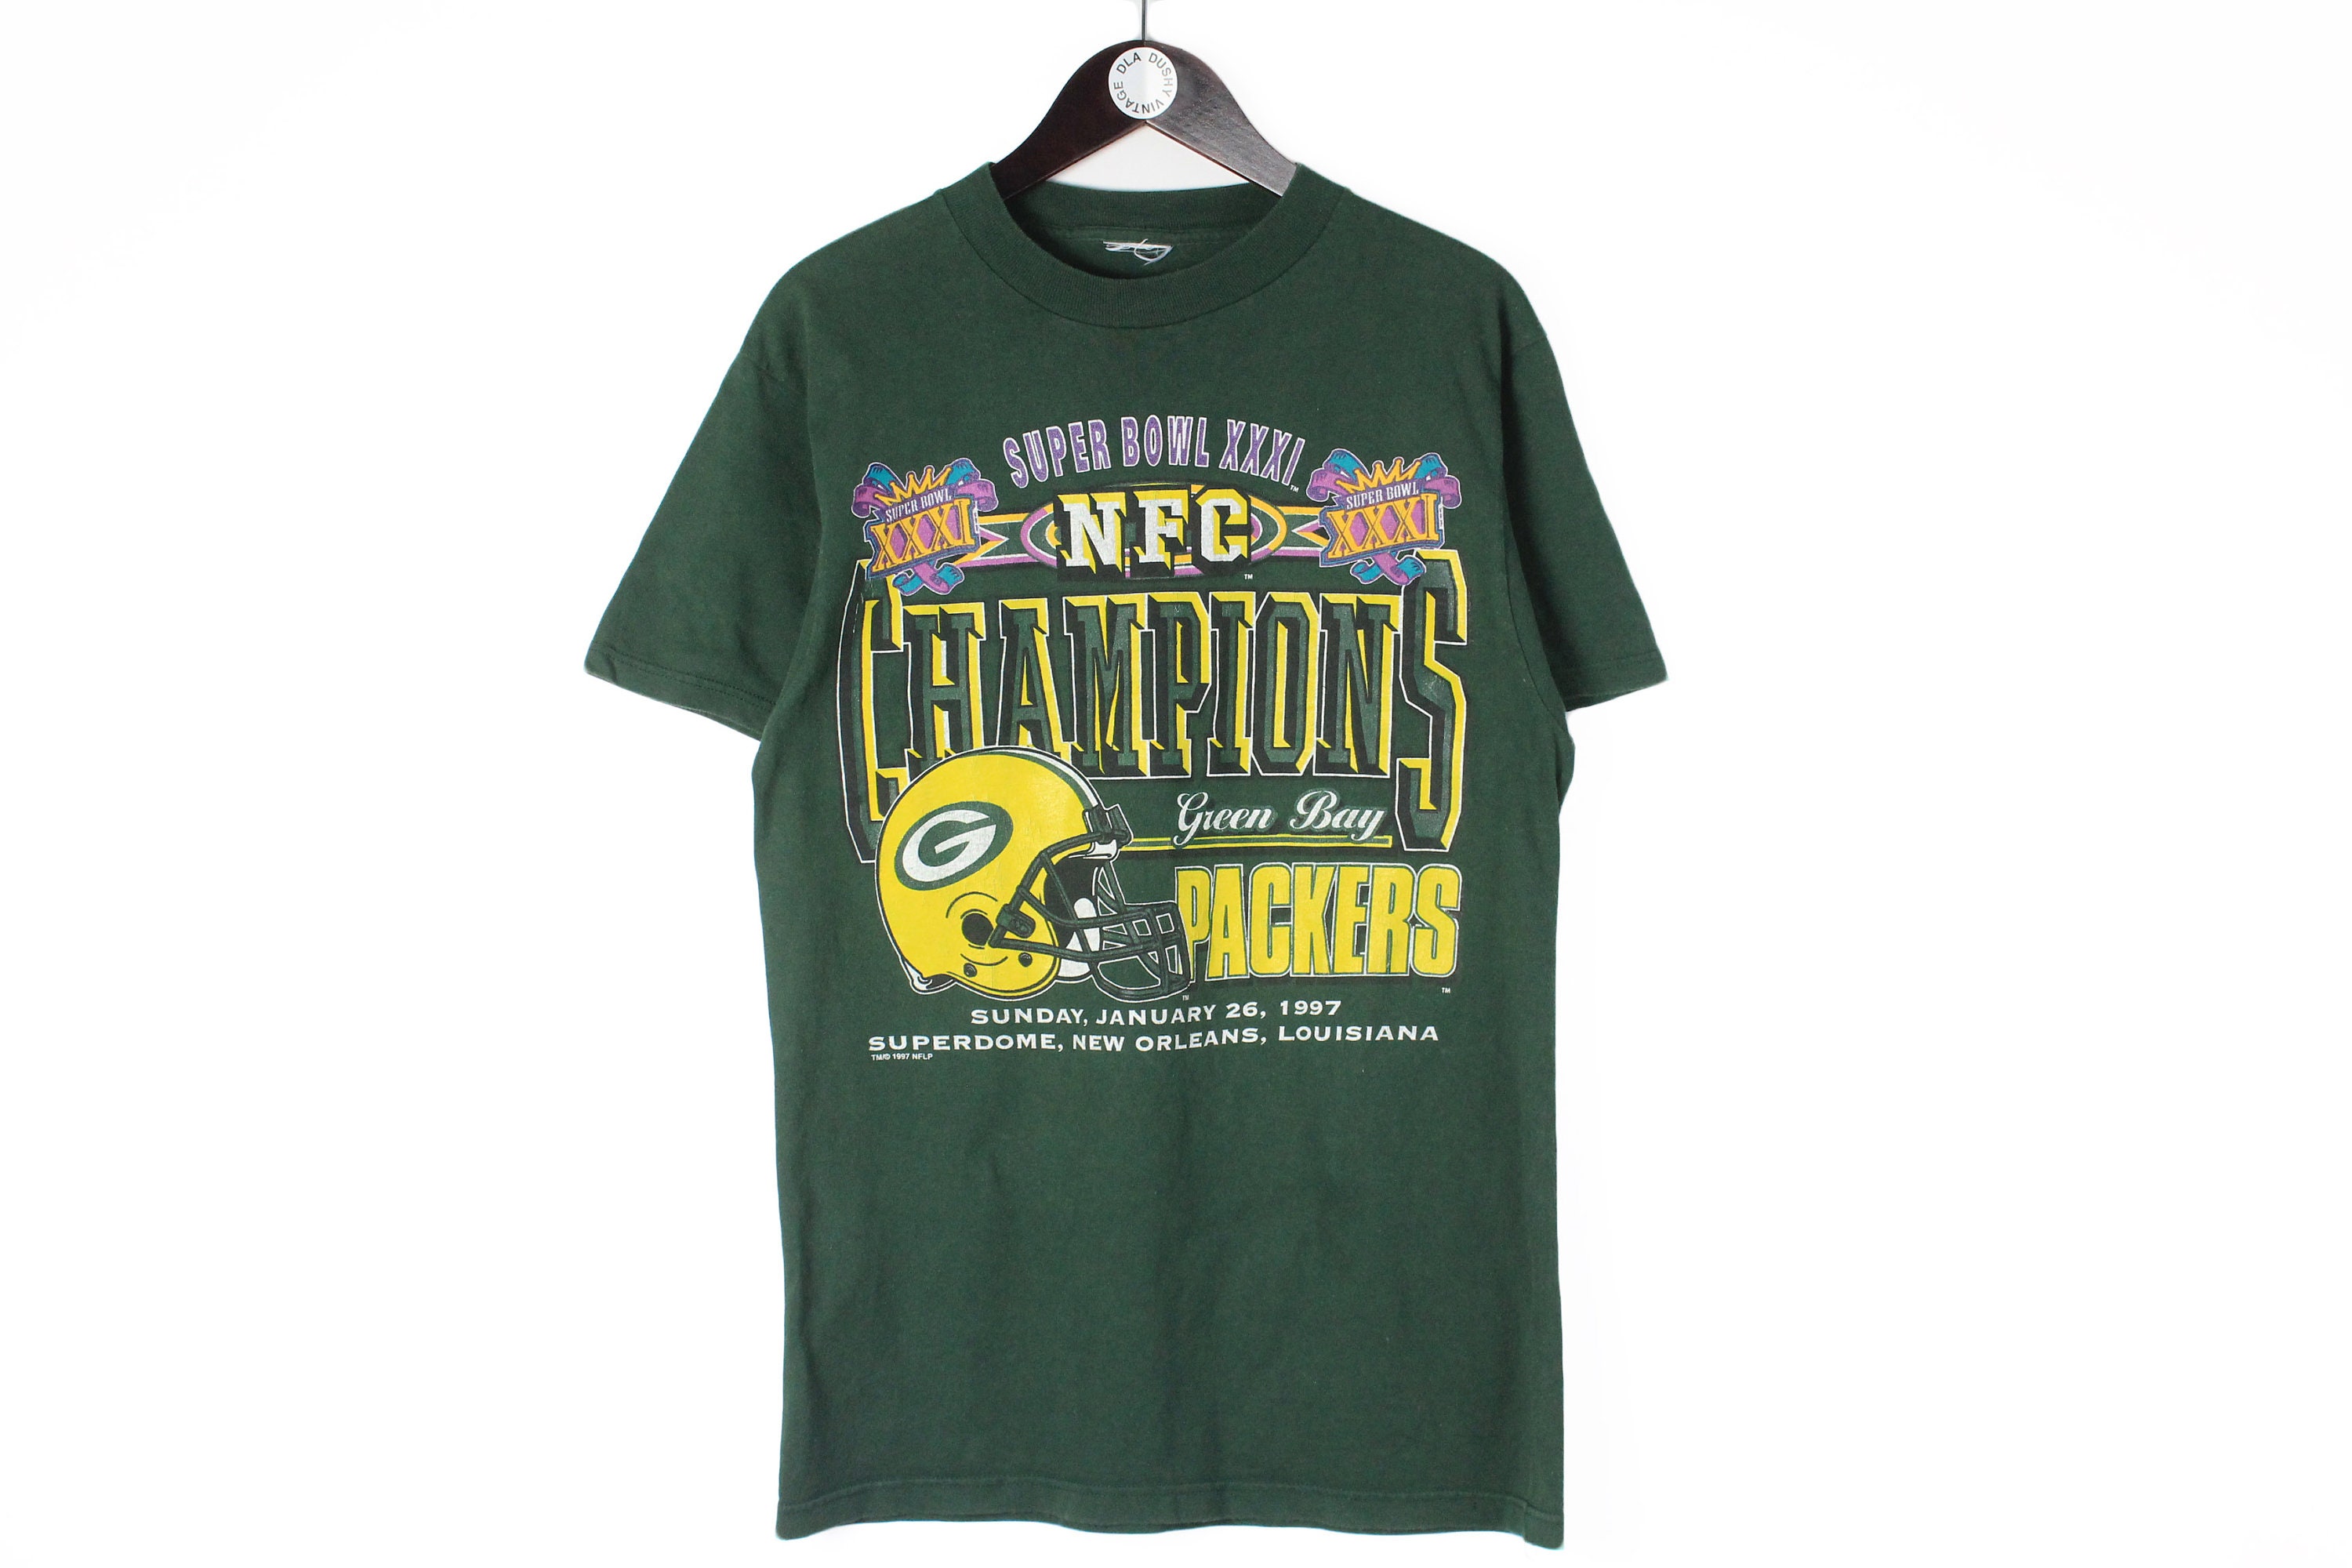 Vintage NFL Shirts & Retro NFL Jerseys for Sale - Classic American Football  Clohing